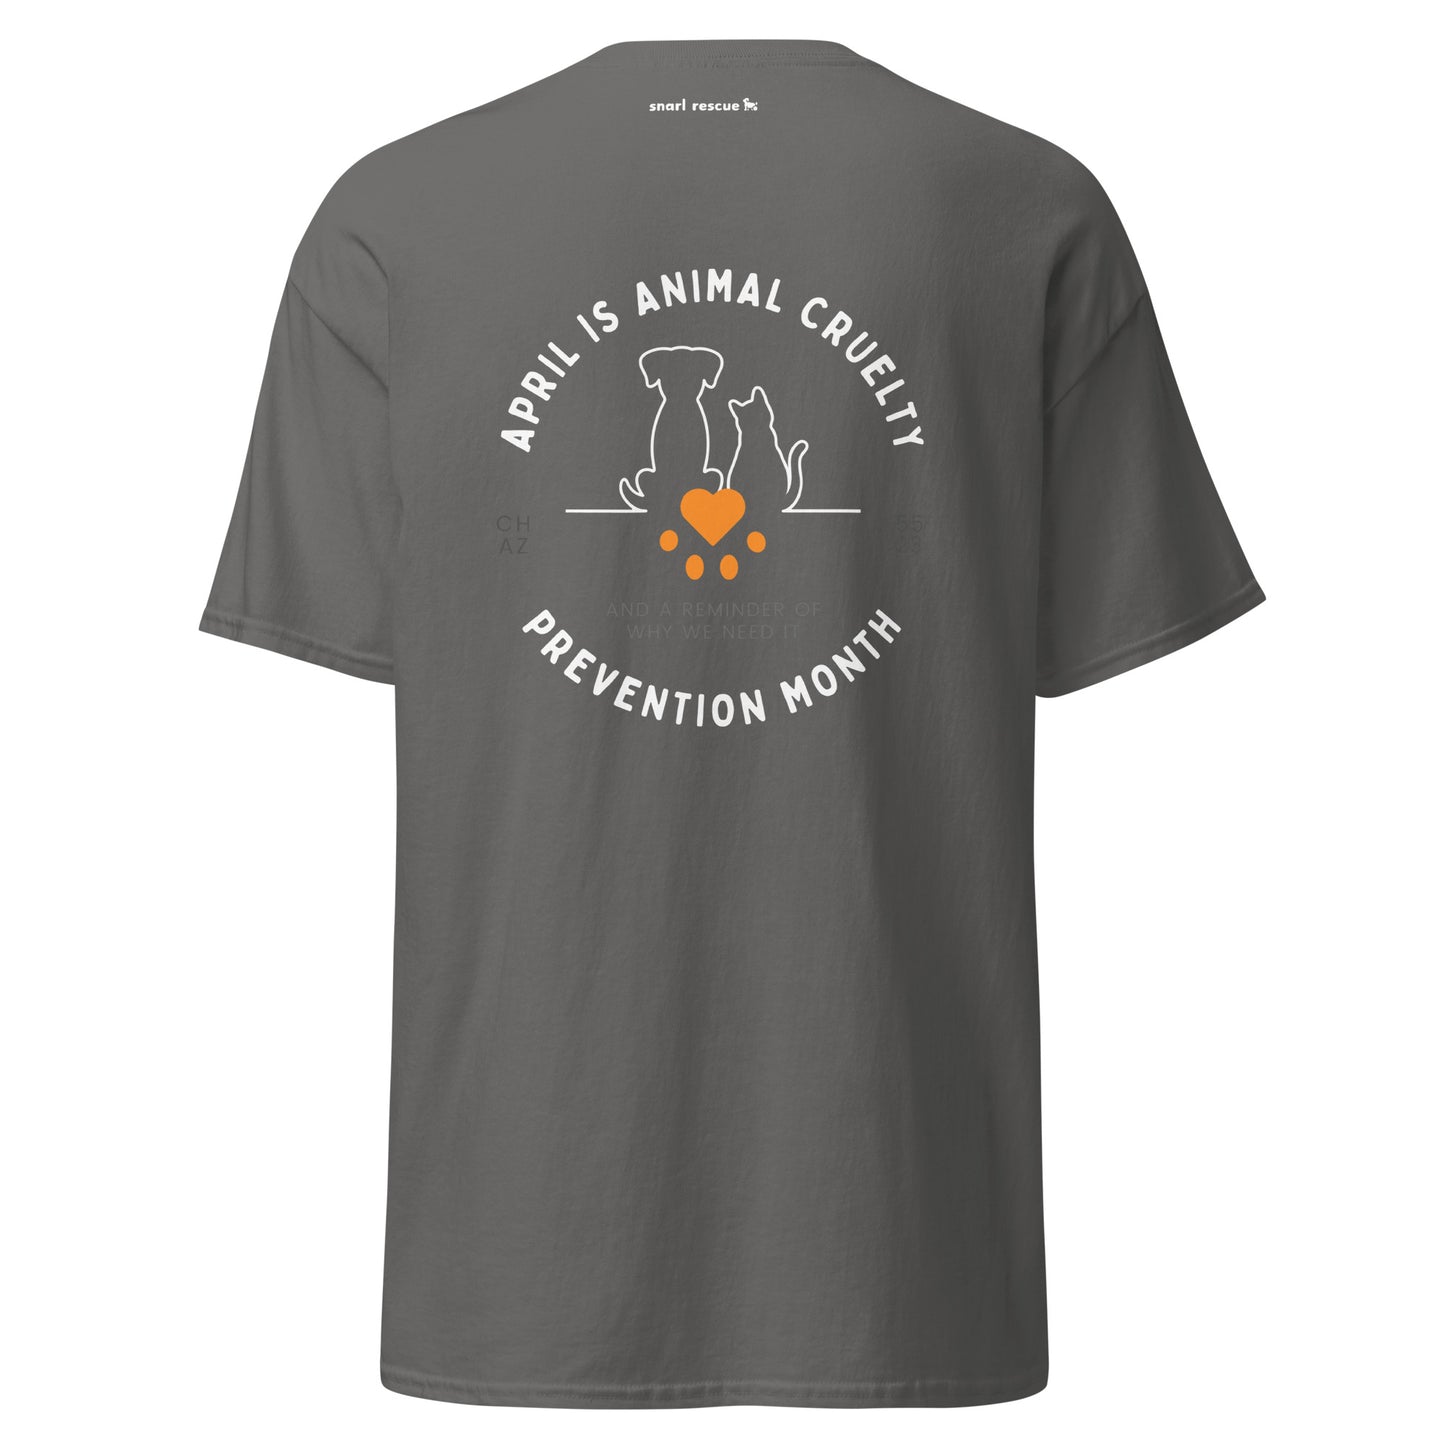 The "Protected Paws" Advocacy Against Animal Cruelty Tee